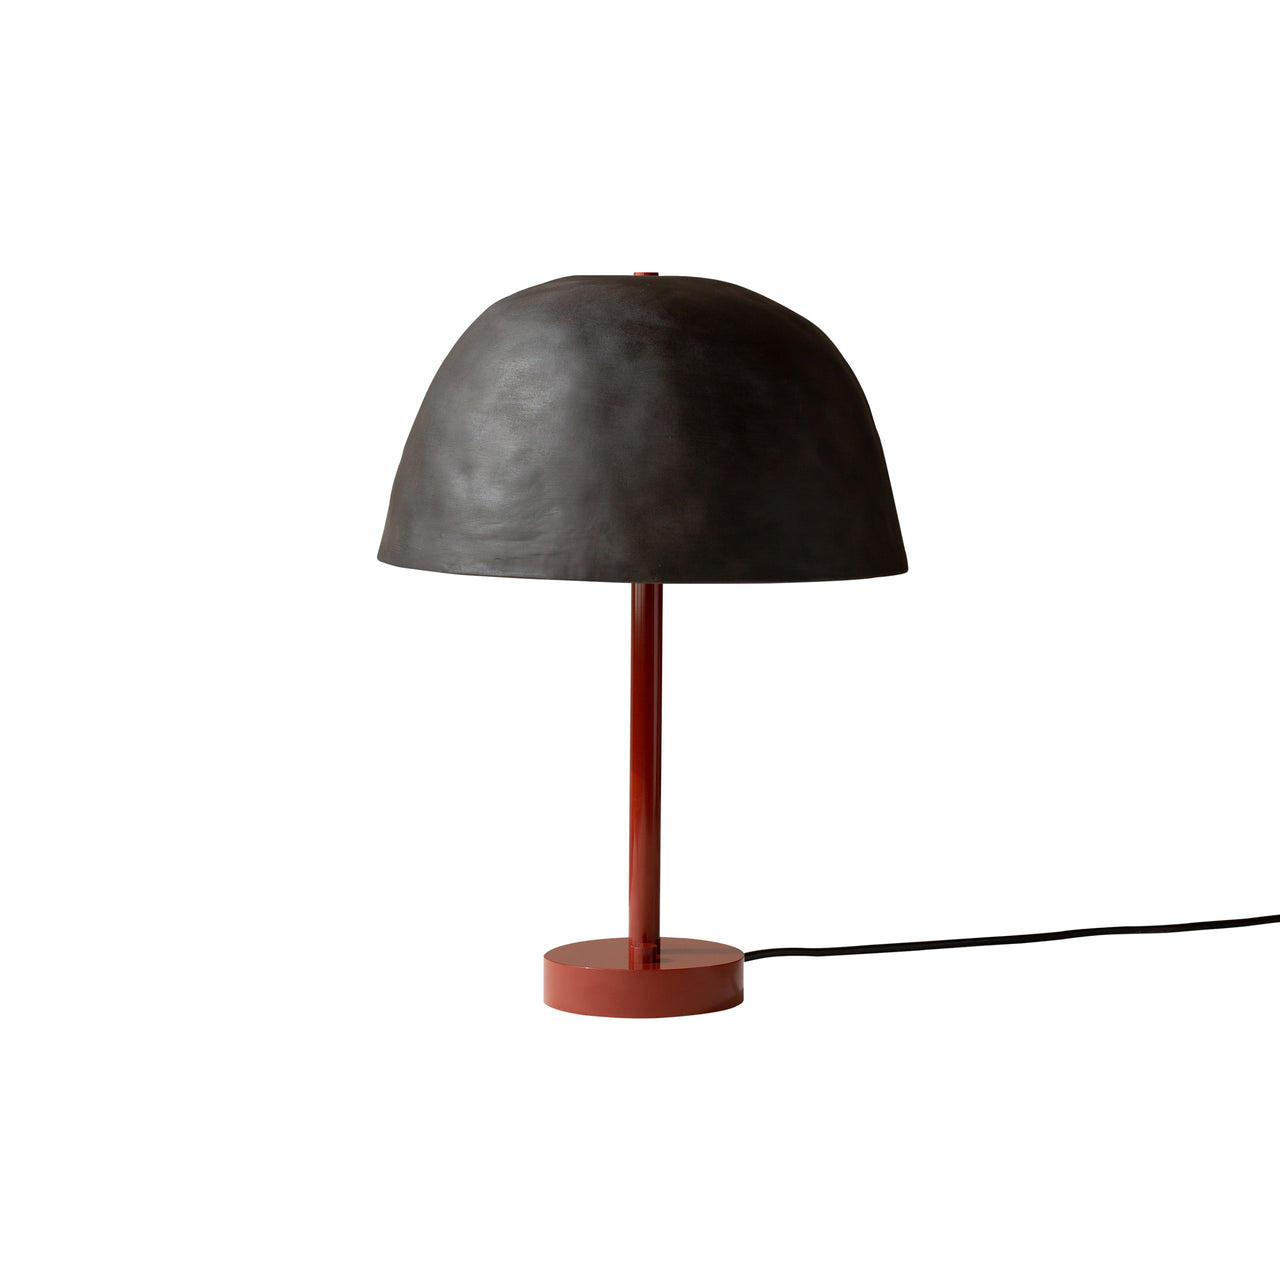 Dome Table Lamp: Black Clay + Oxide Red